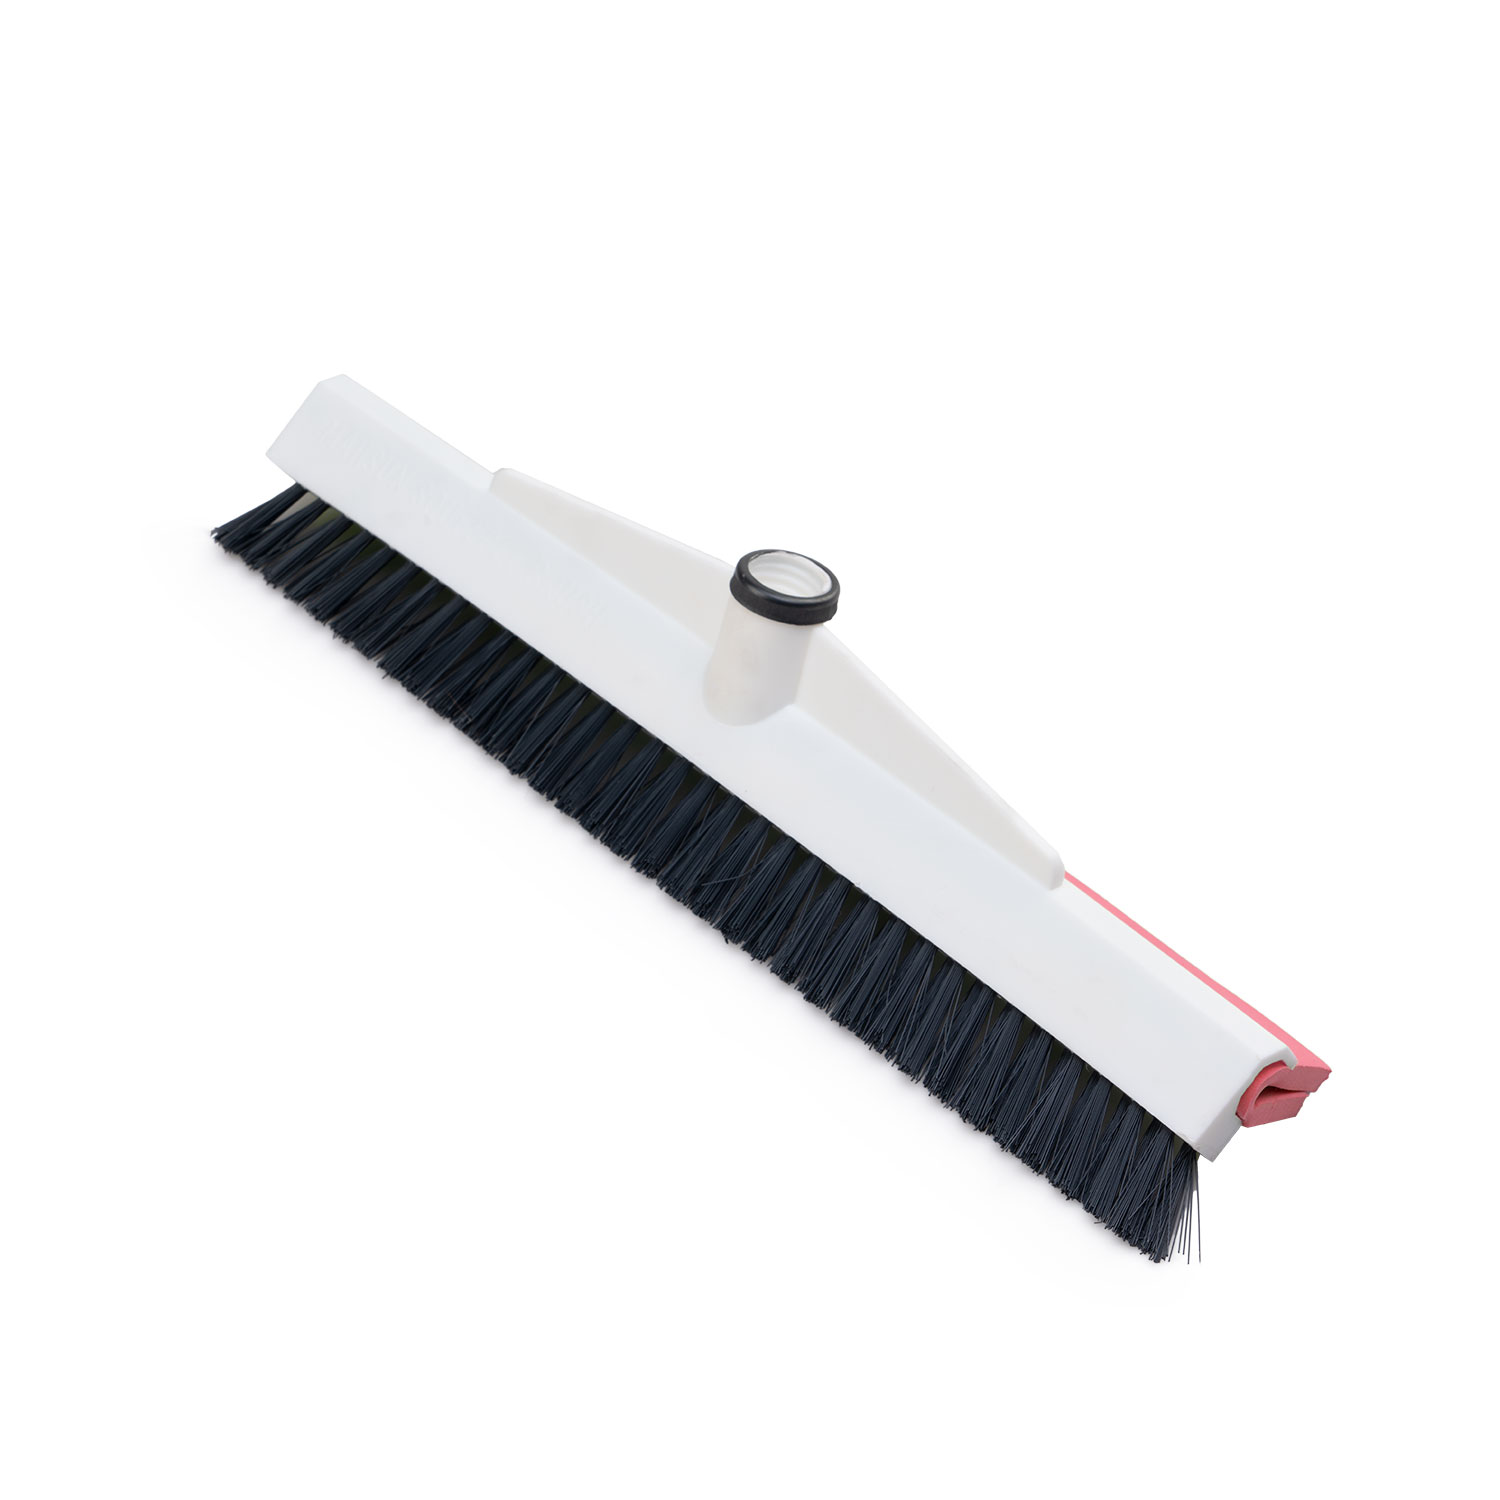 Mahsun / Squeegee Brush (Whitout Handle)